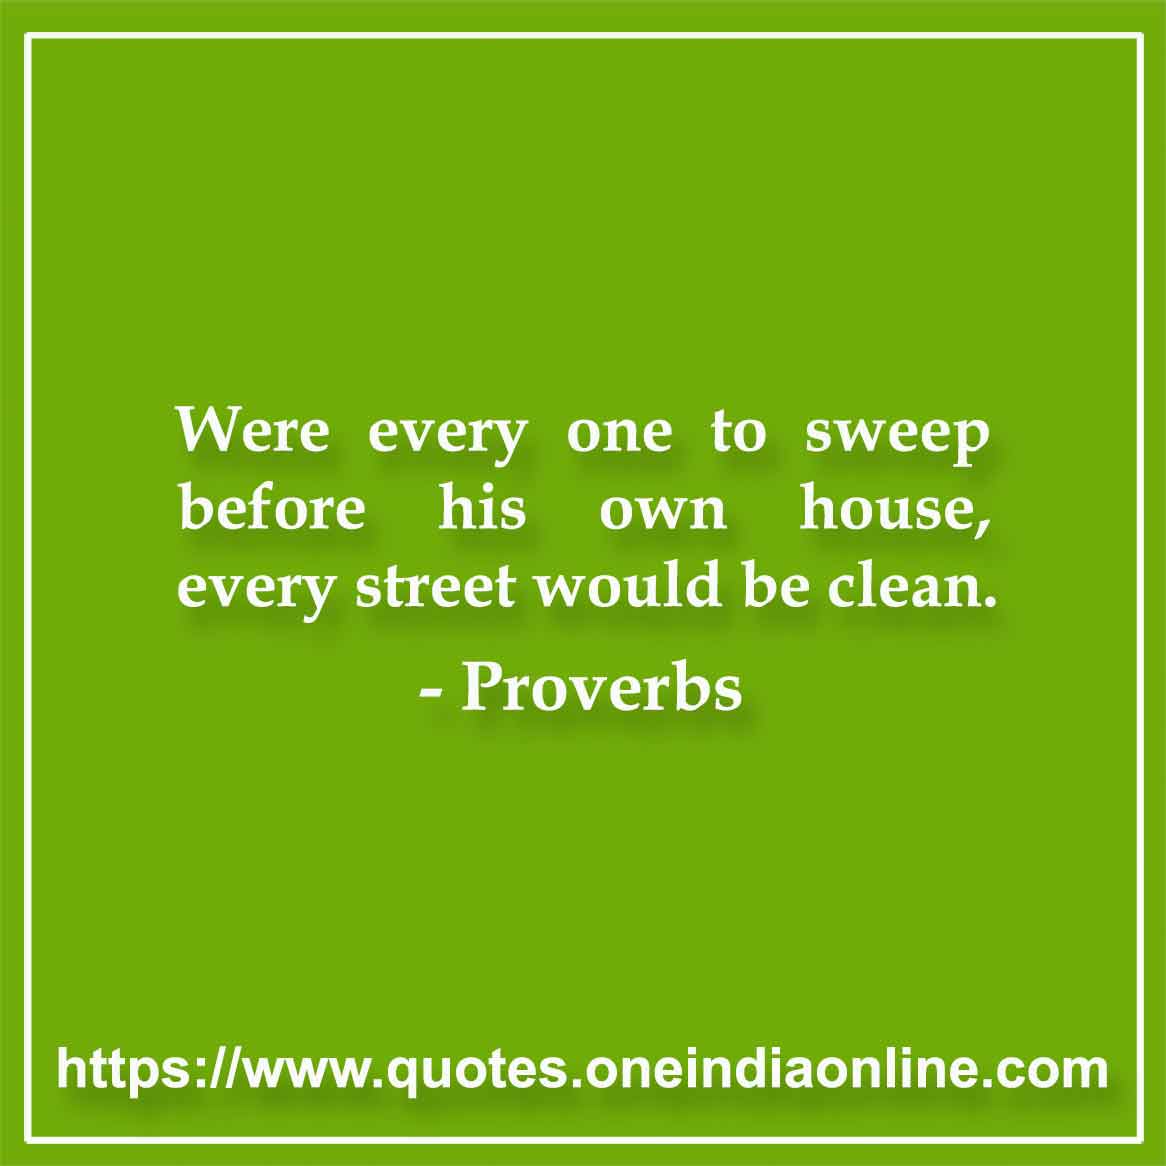 Were every one to sweep before his own house, every street would be clean.

Dutch 